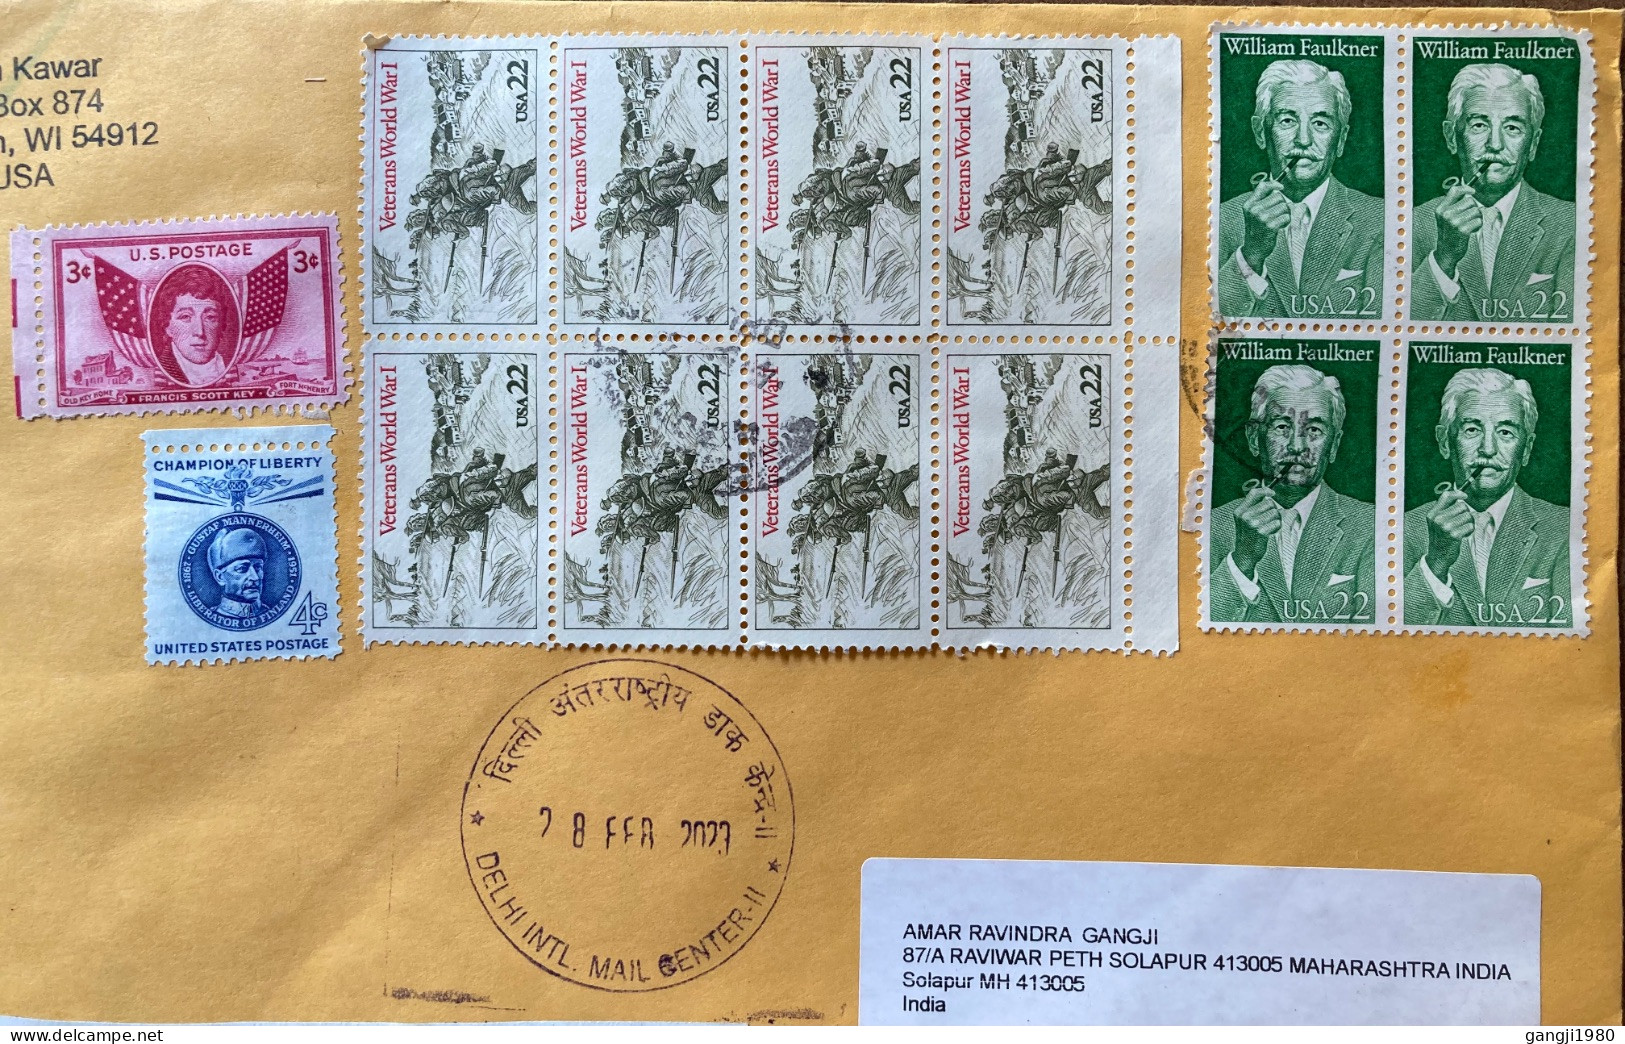 USA 2023, COVER USED TO INDIA, WORLD WAR -1, WILLIAM FAULKNER, FRANCIS SCOT KEY, MULTI 14 STAMP, DELHI CITY CANCEL. - Covers & Documents